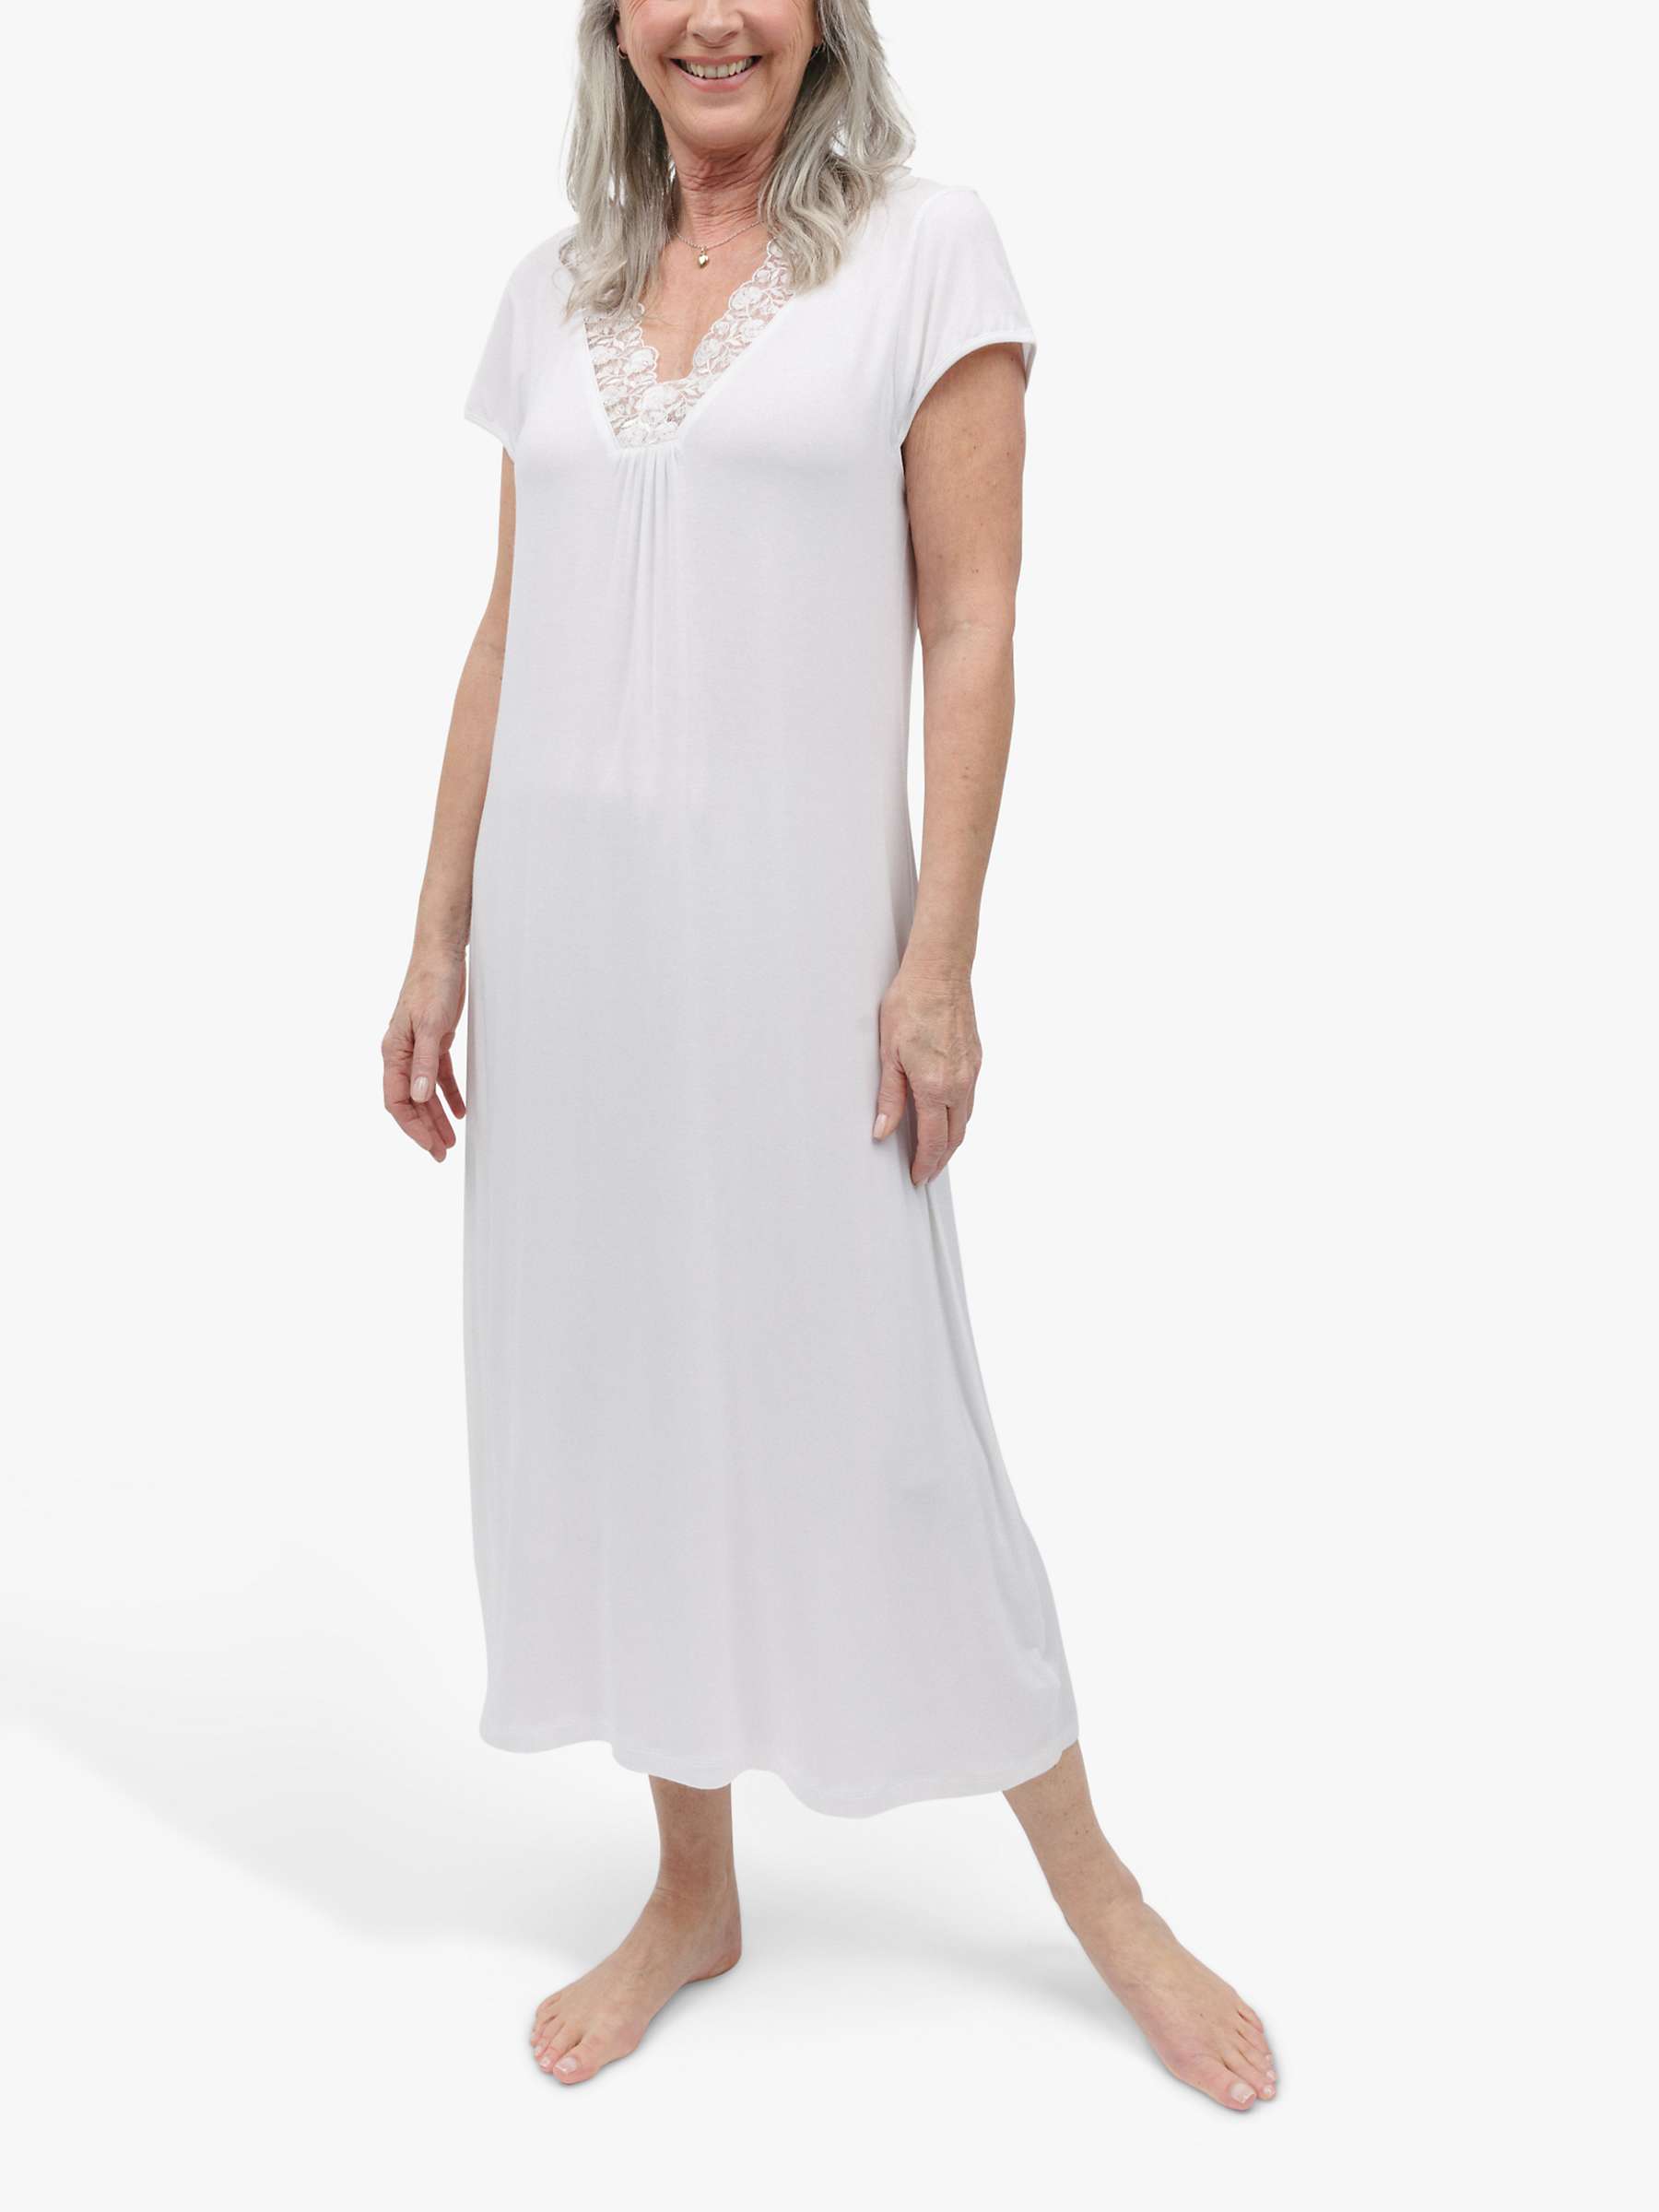 Buy Cyberjammies Evette Lace Trim Nightdress, White Online at johnlewis.com